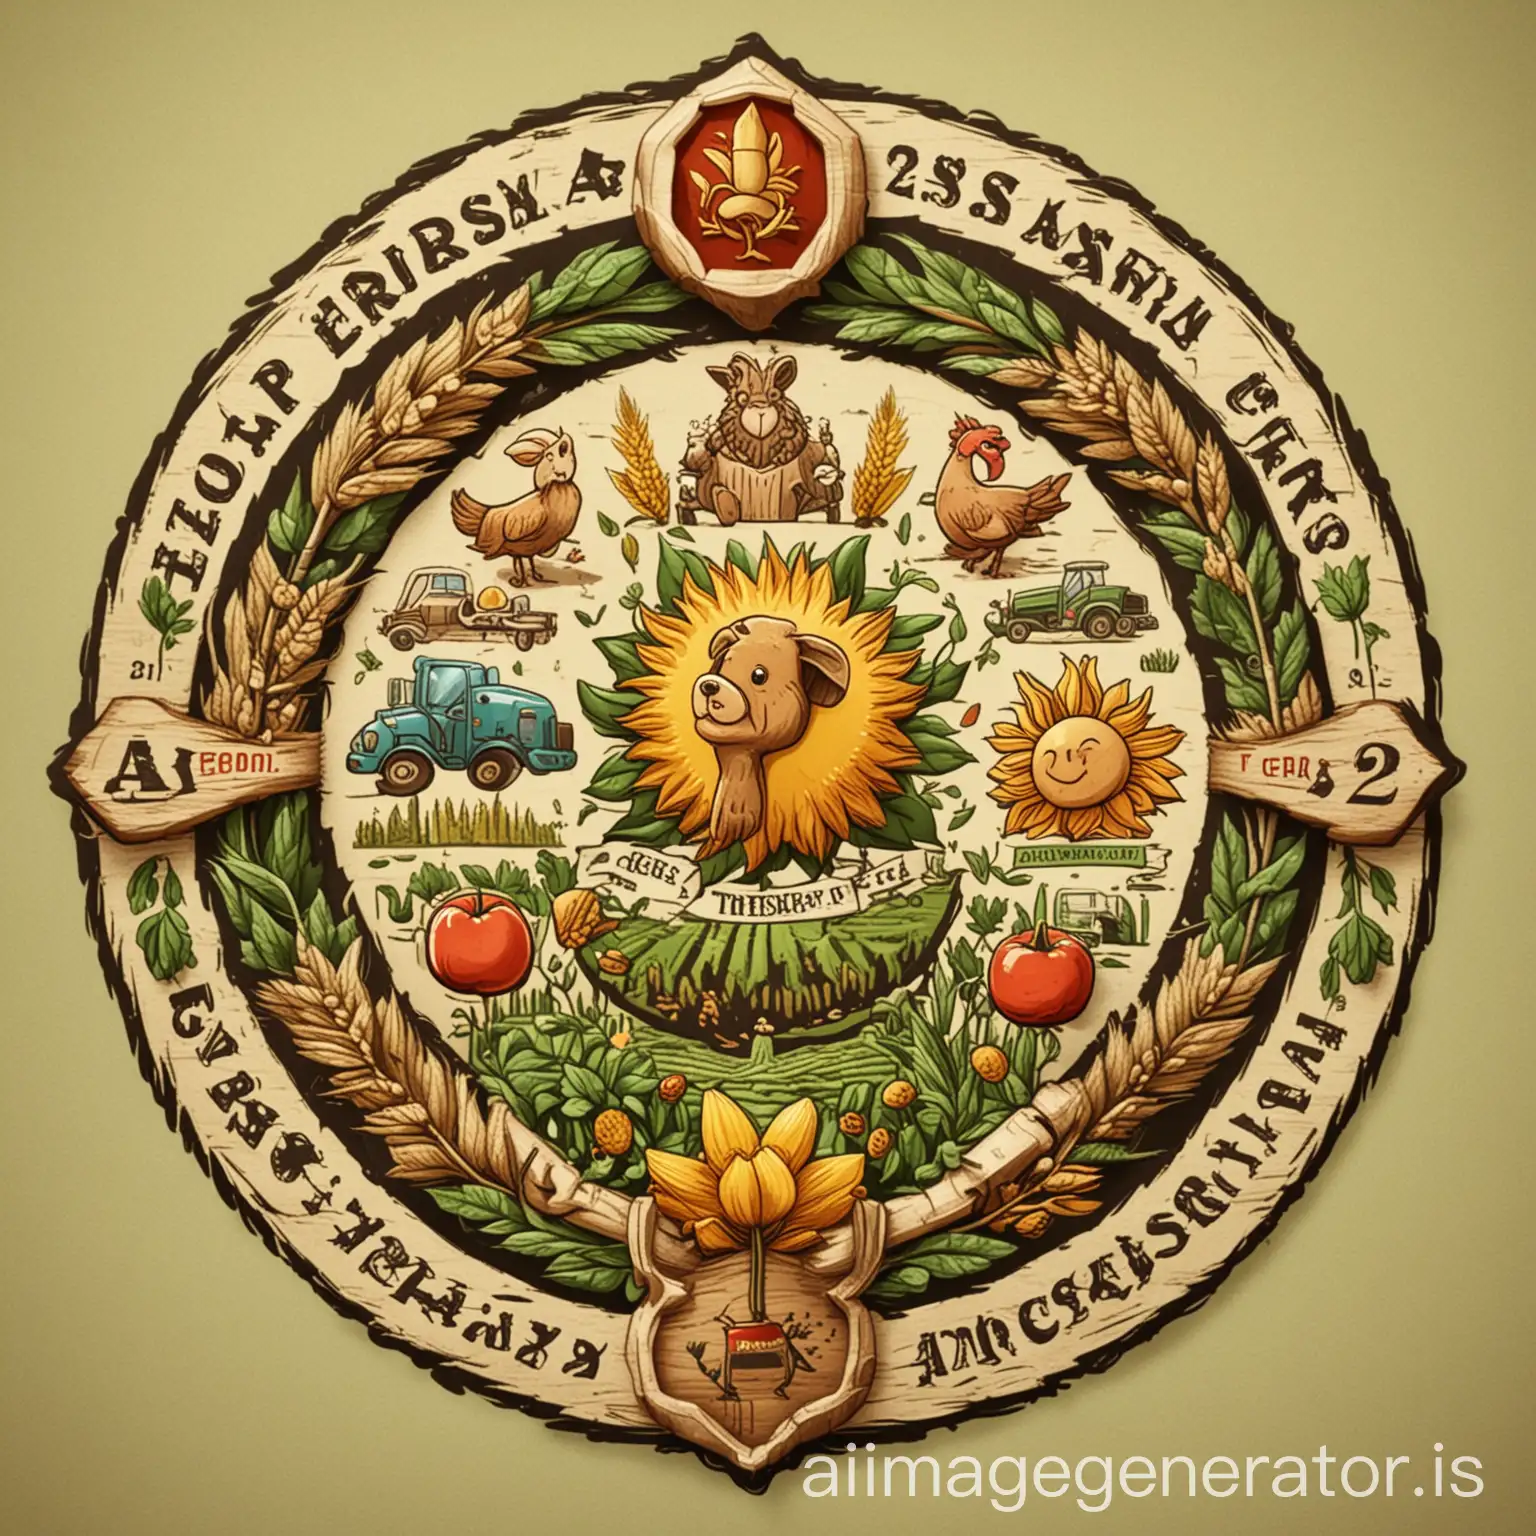 Agrarian232-Emblem-with-Agriculture-Environment-and-Cute-Animals